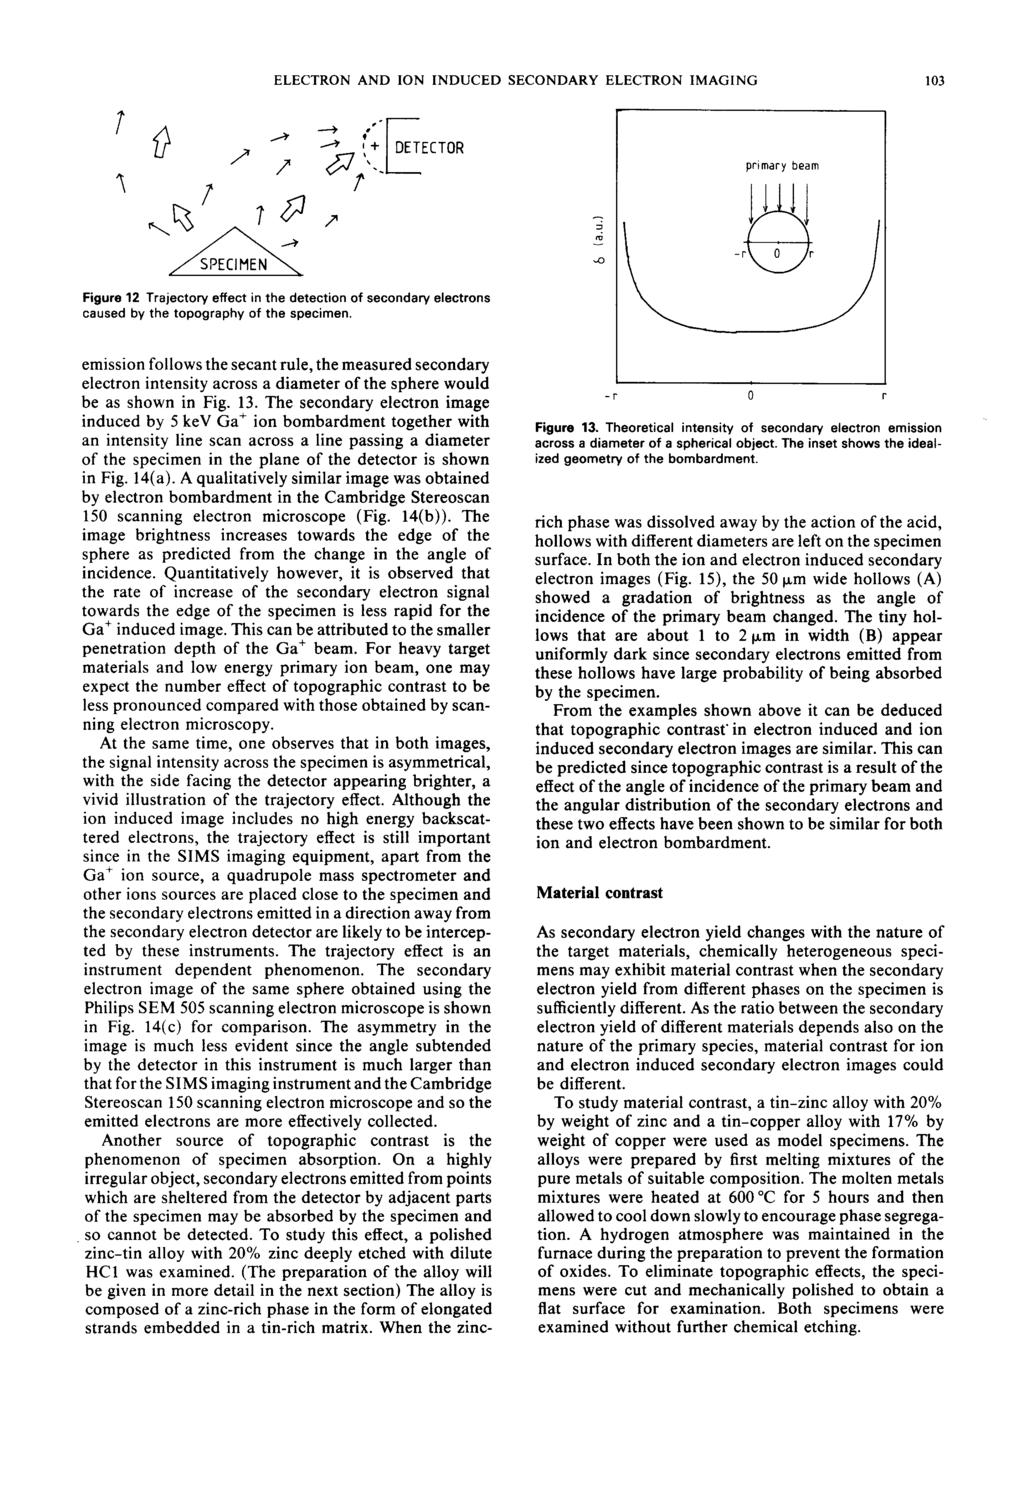 ELECTRON AND ION INDUCED SECONDARY ELECTRON IMAGING 103 primary beam Figure 12 Trajectory effect in the detection of secondary electrons caused by the topography of the specimen.